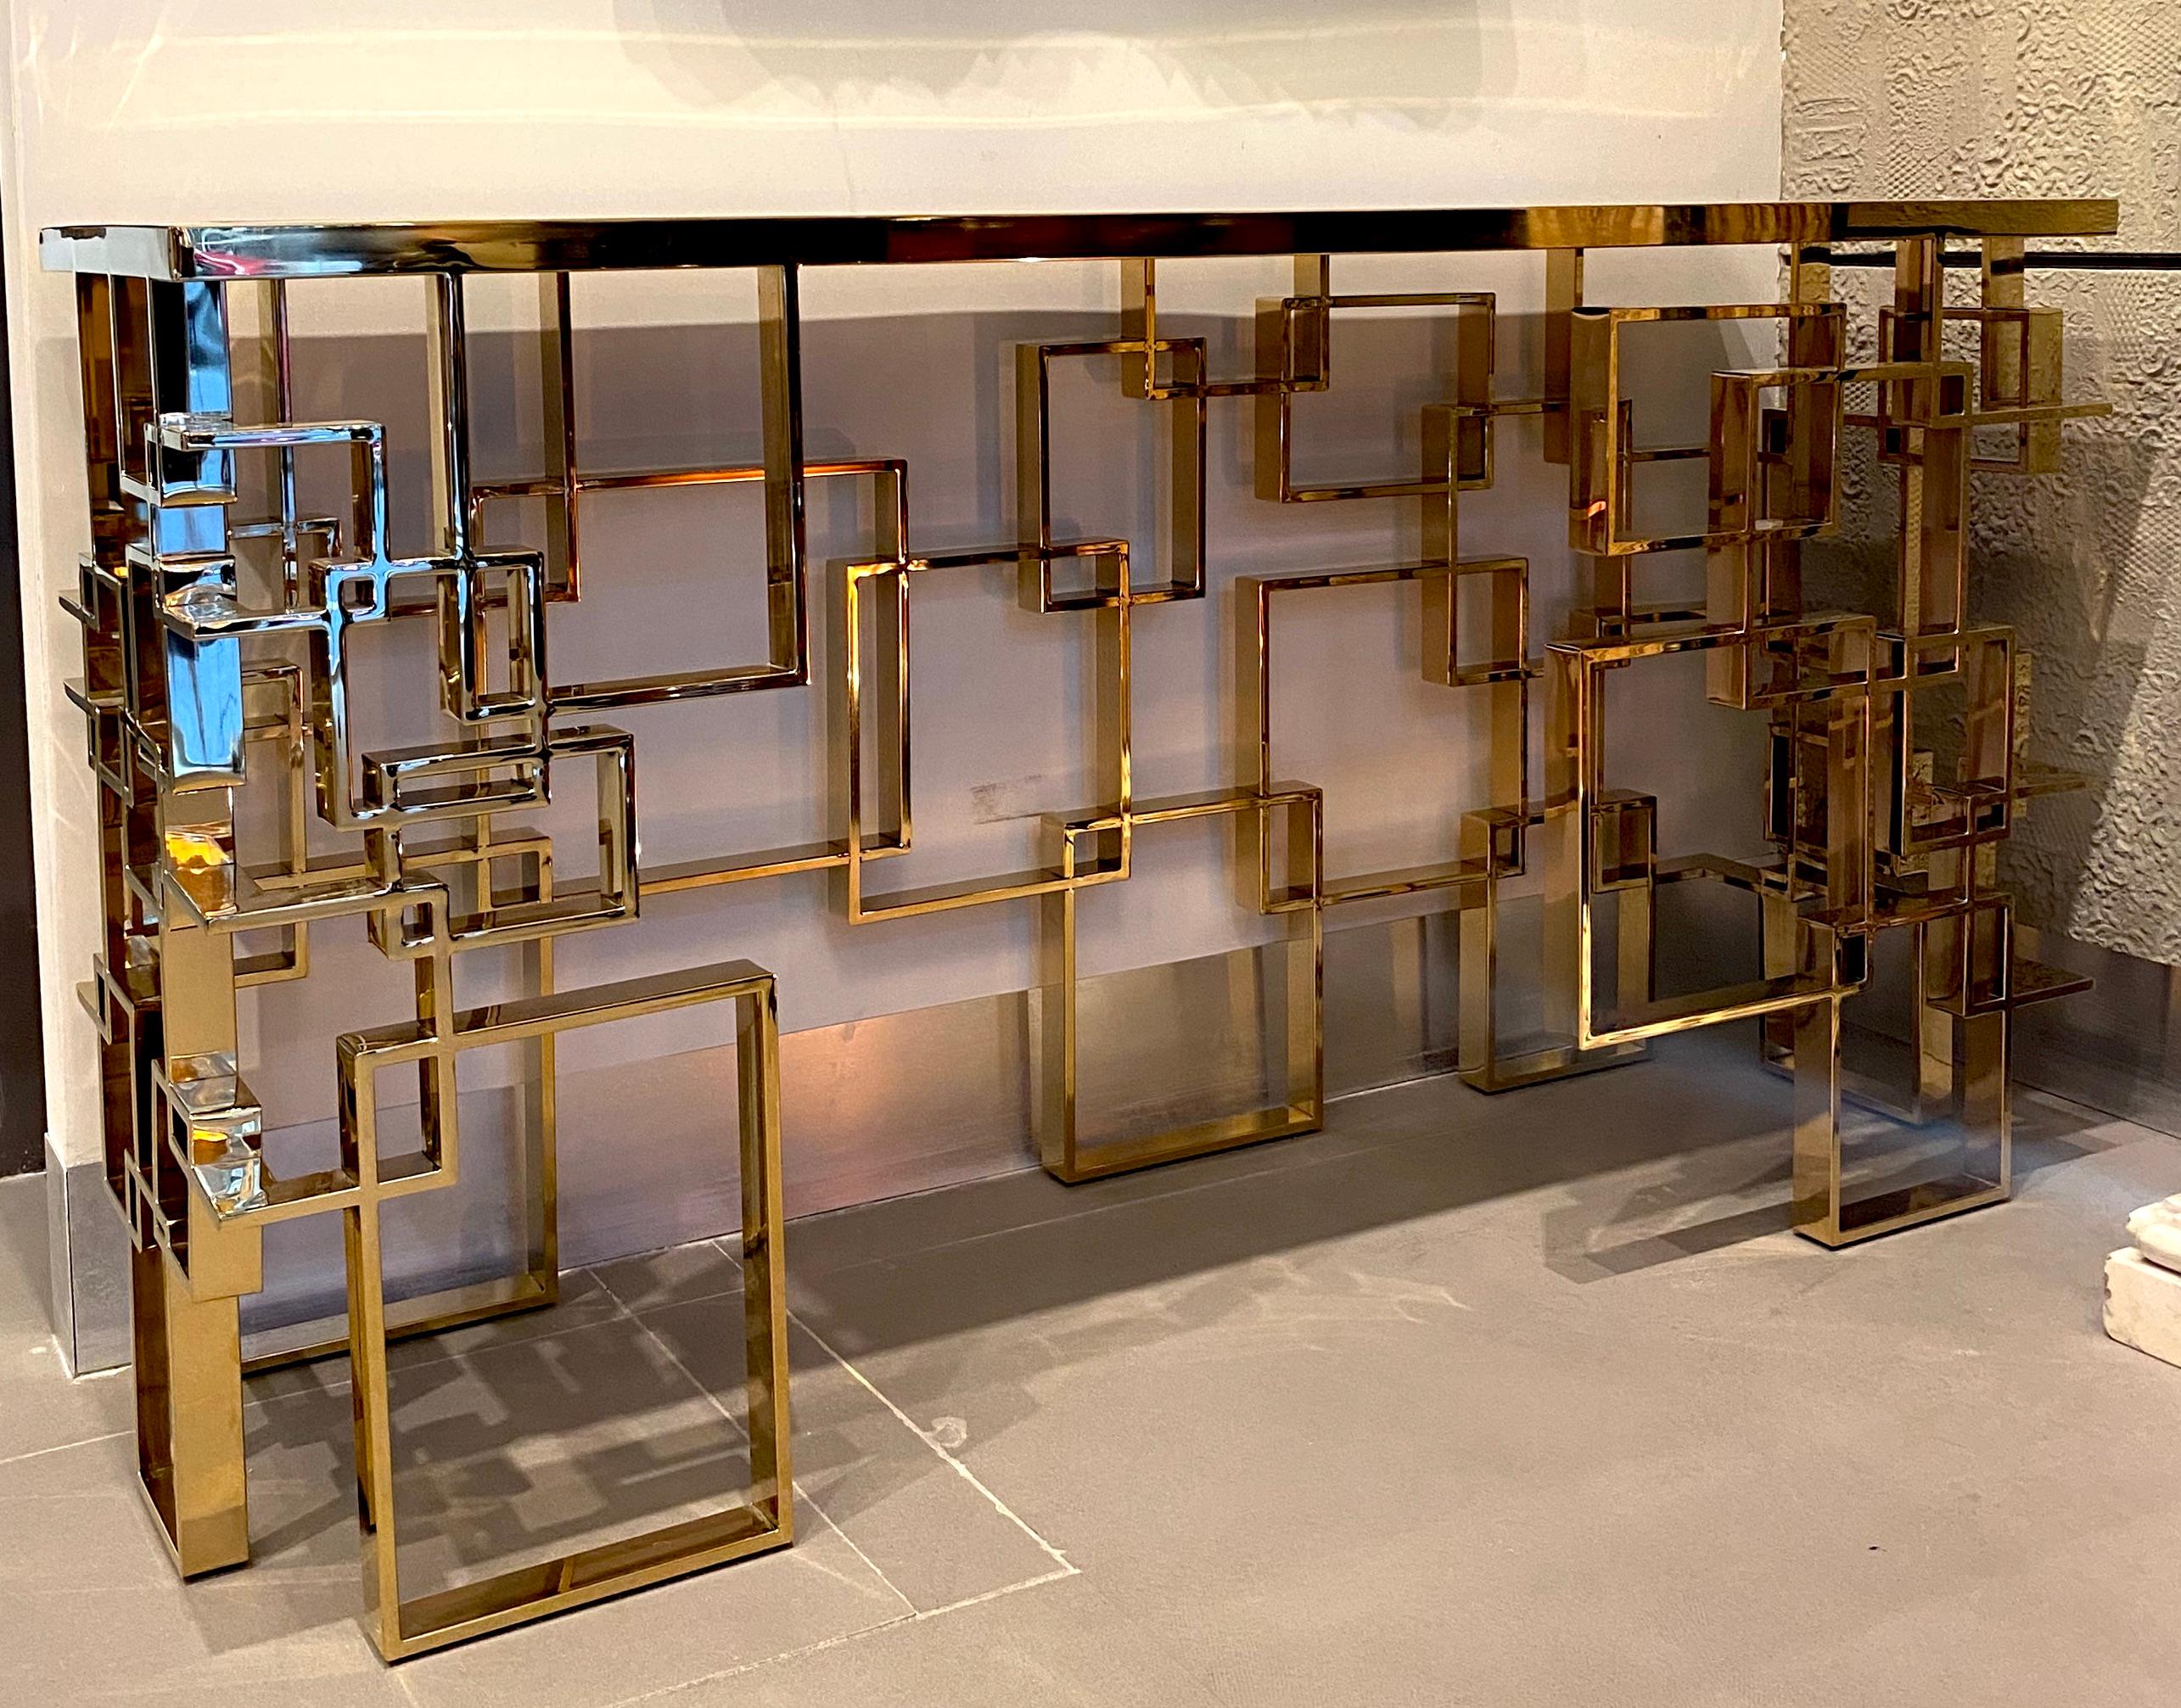 Fabulous modern brass sculpture console table or center table with a Mondrian motive glass top. 
Handmade by a master artisan.
The glass top color we can customize on request.
Available also a pair.